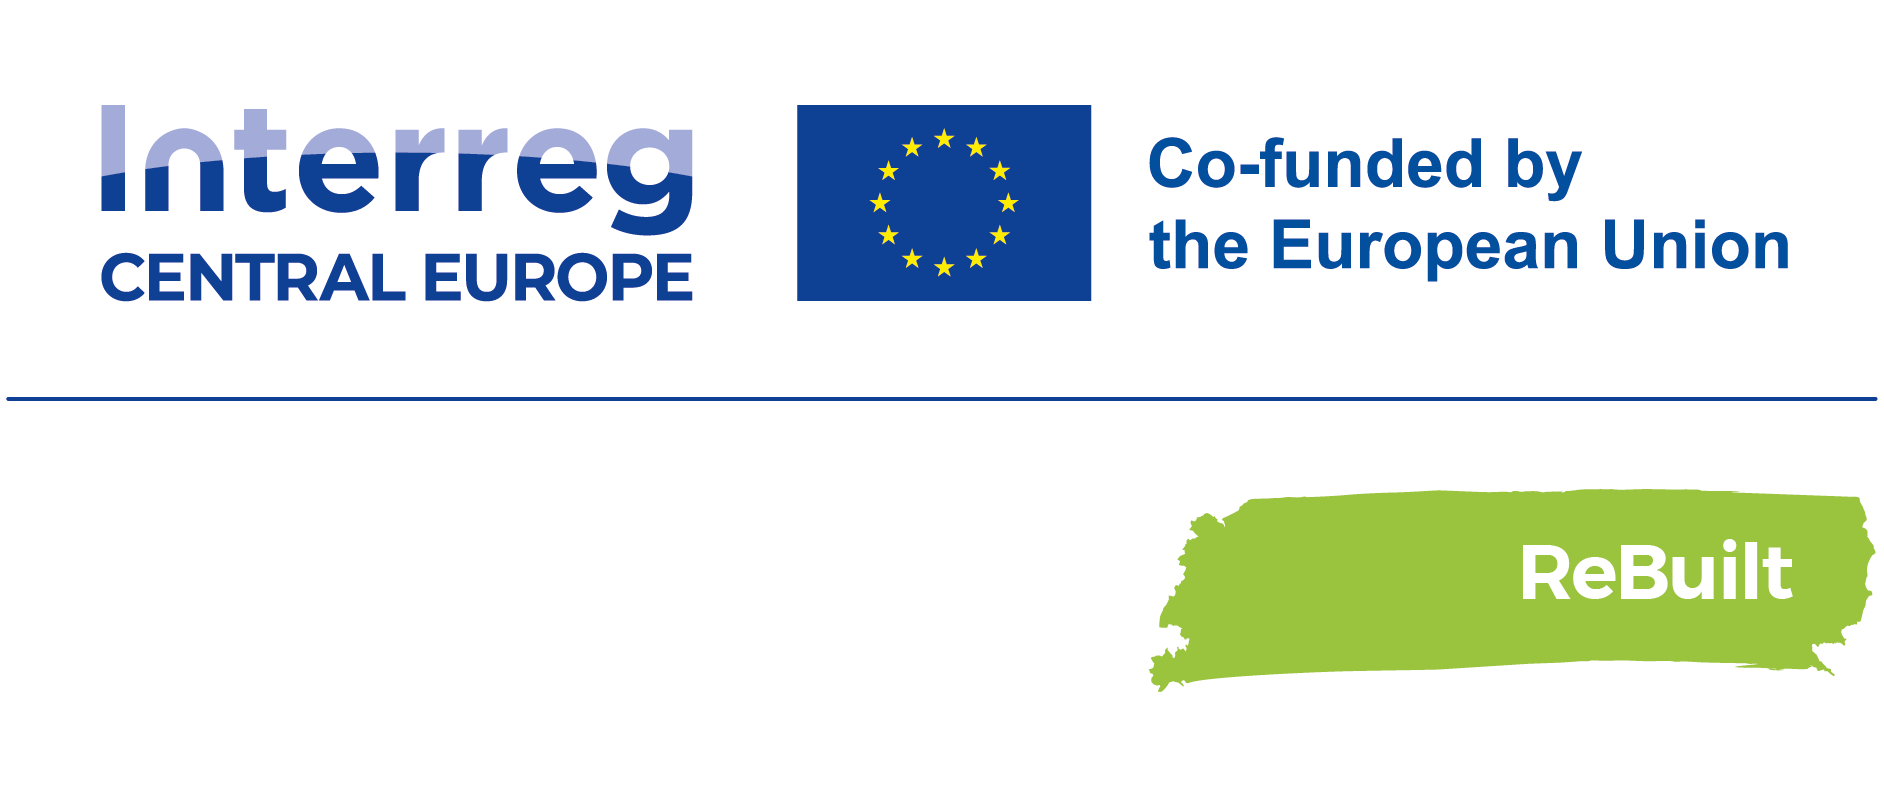 Official Logo of the 'Interreg Central Europe' funding programme containing the flag of the European Union as well as the statement 'co-funded by the European Union'. The image contains the name of the project 'ReBuilt' on a green background.